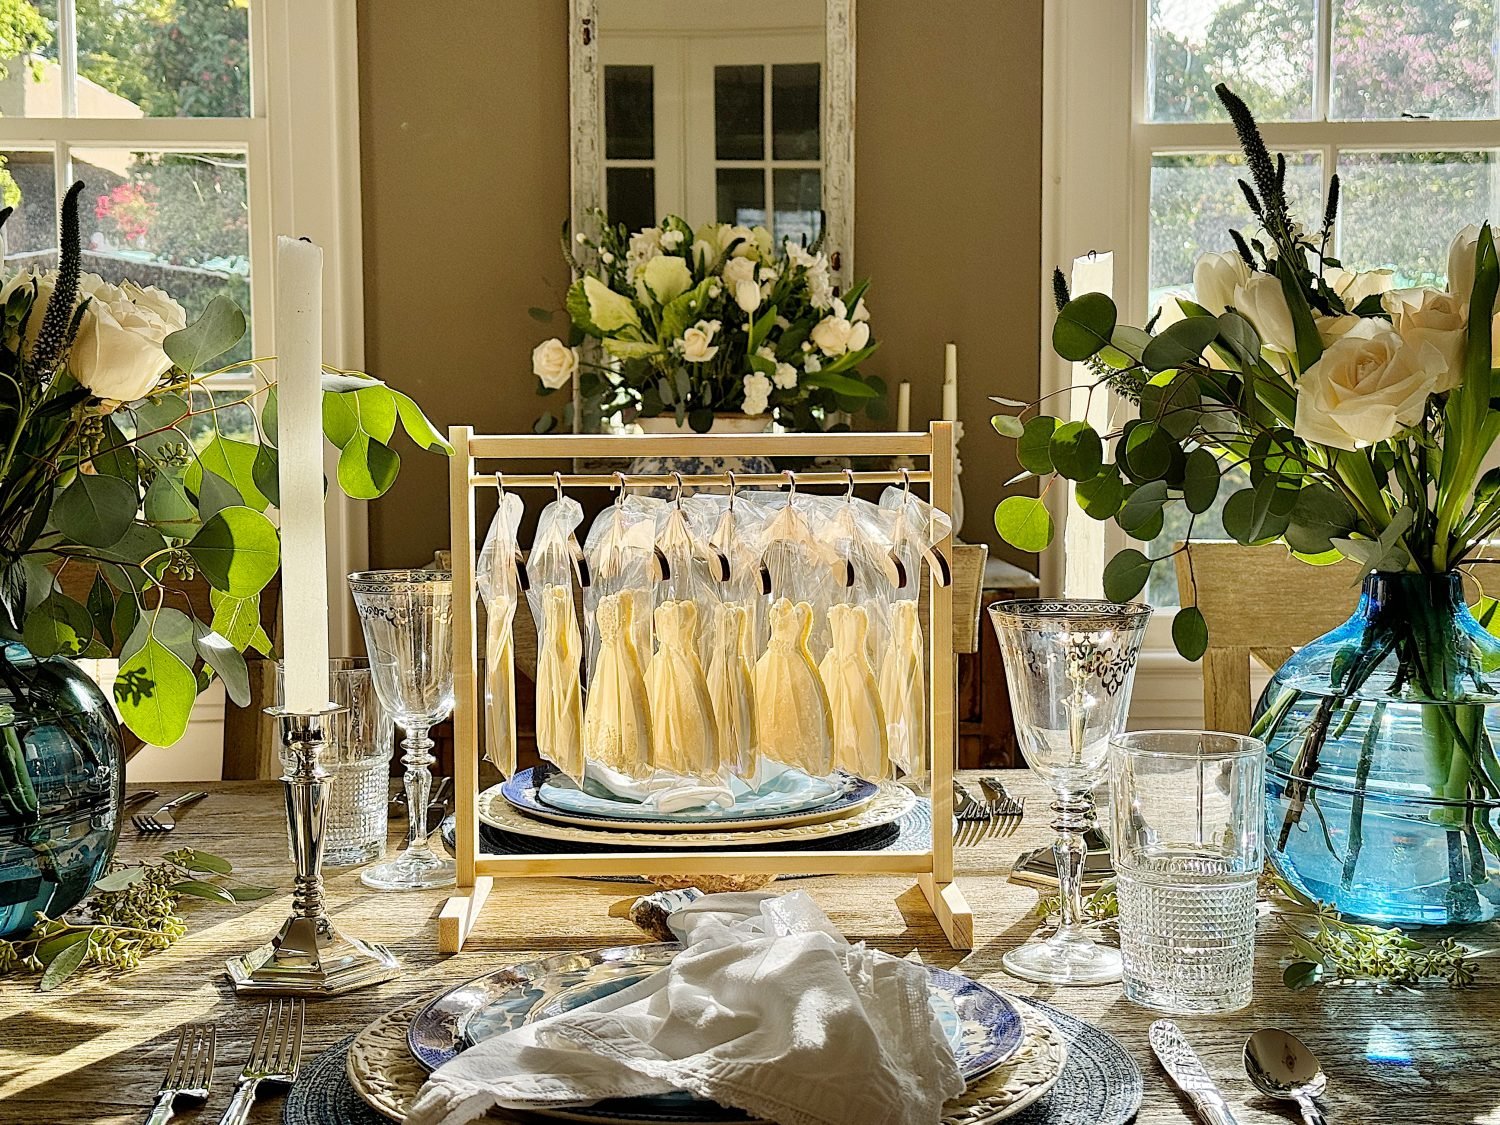 Elegant dining table set with glassware, flowers, and candles in a sunlit room.